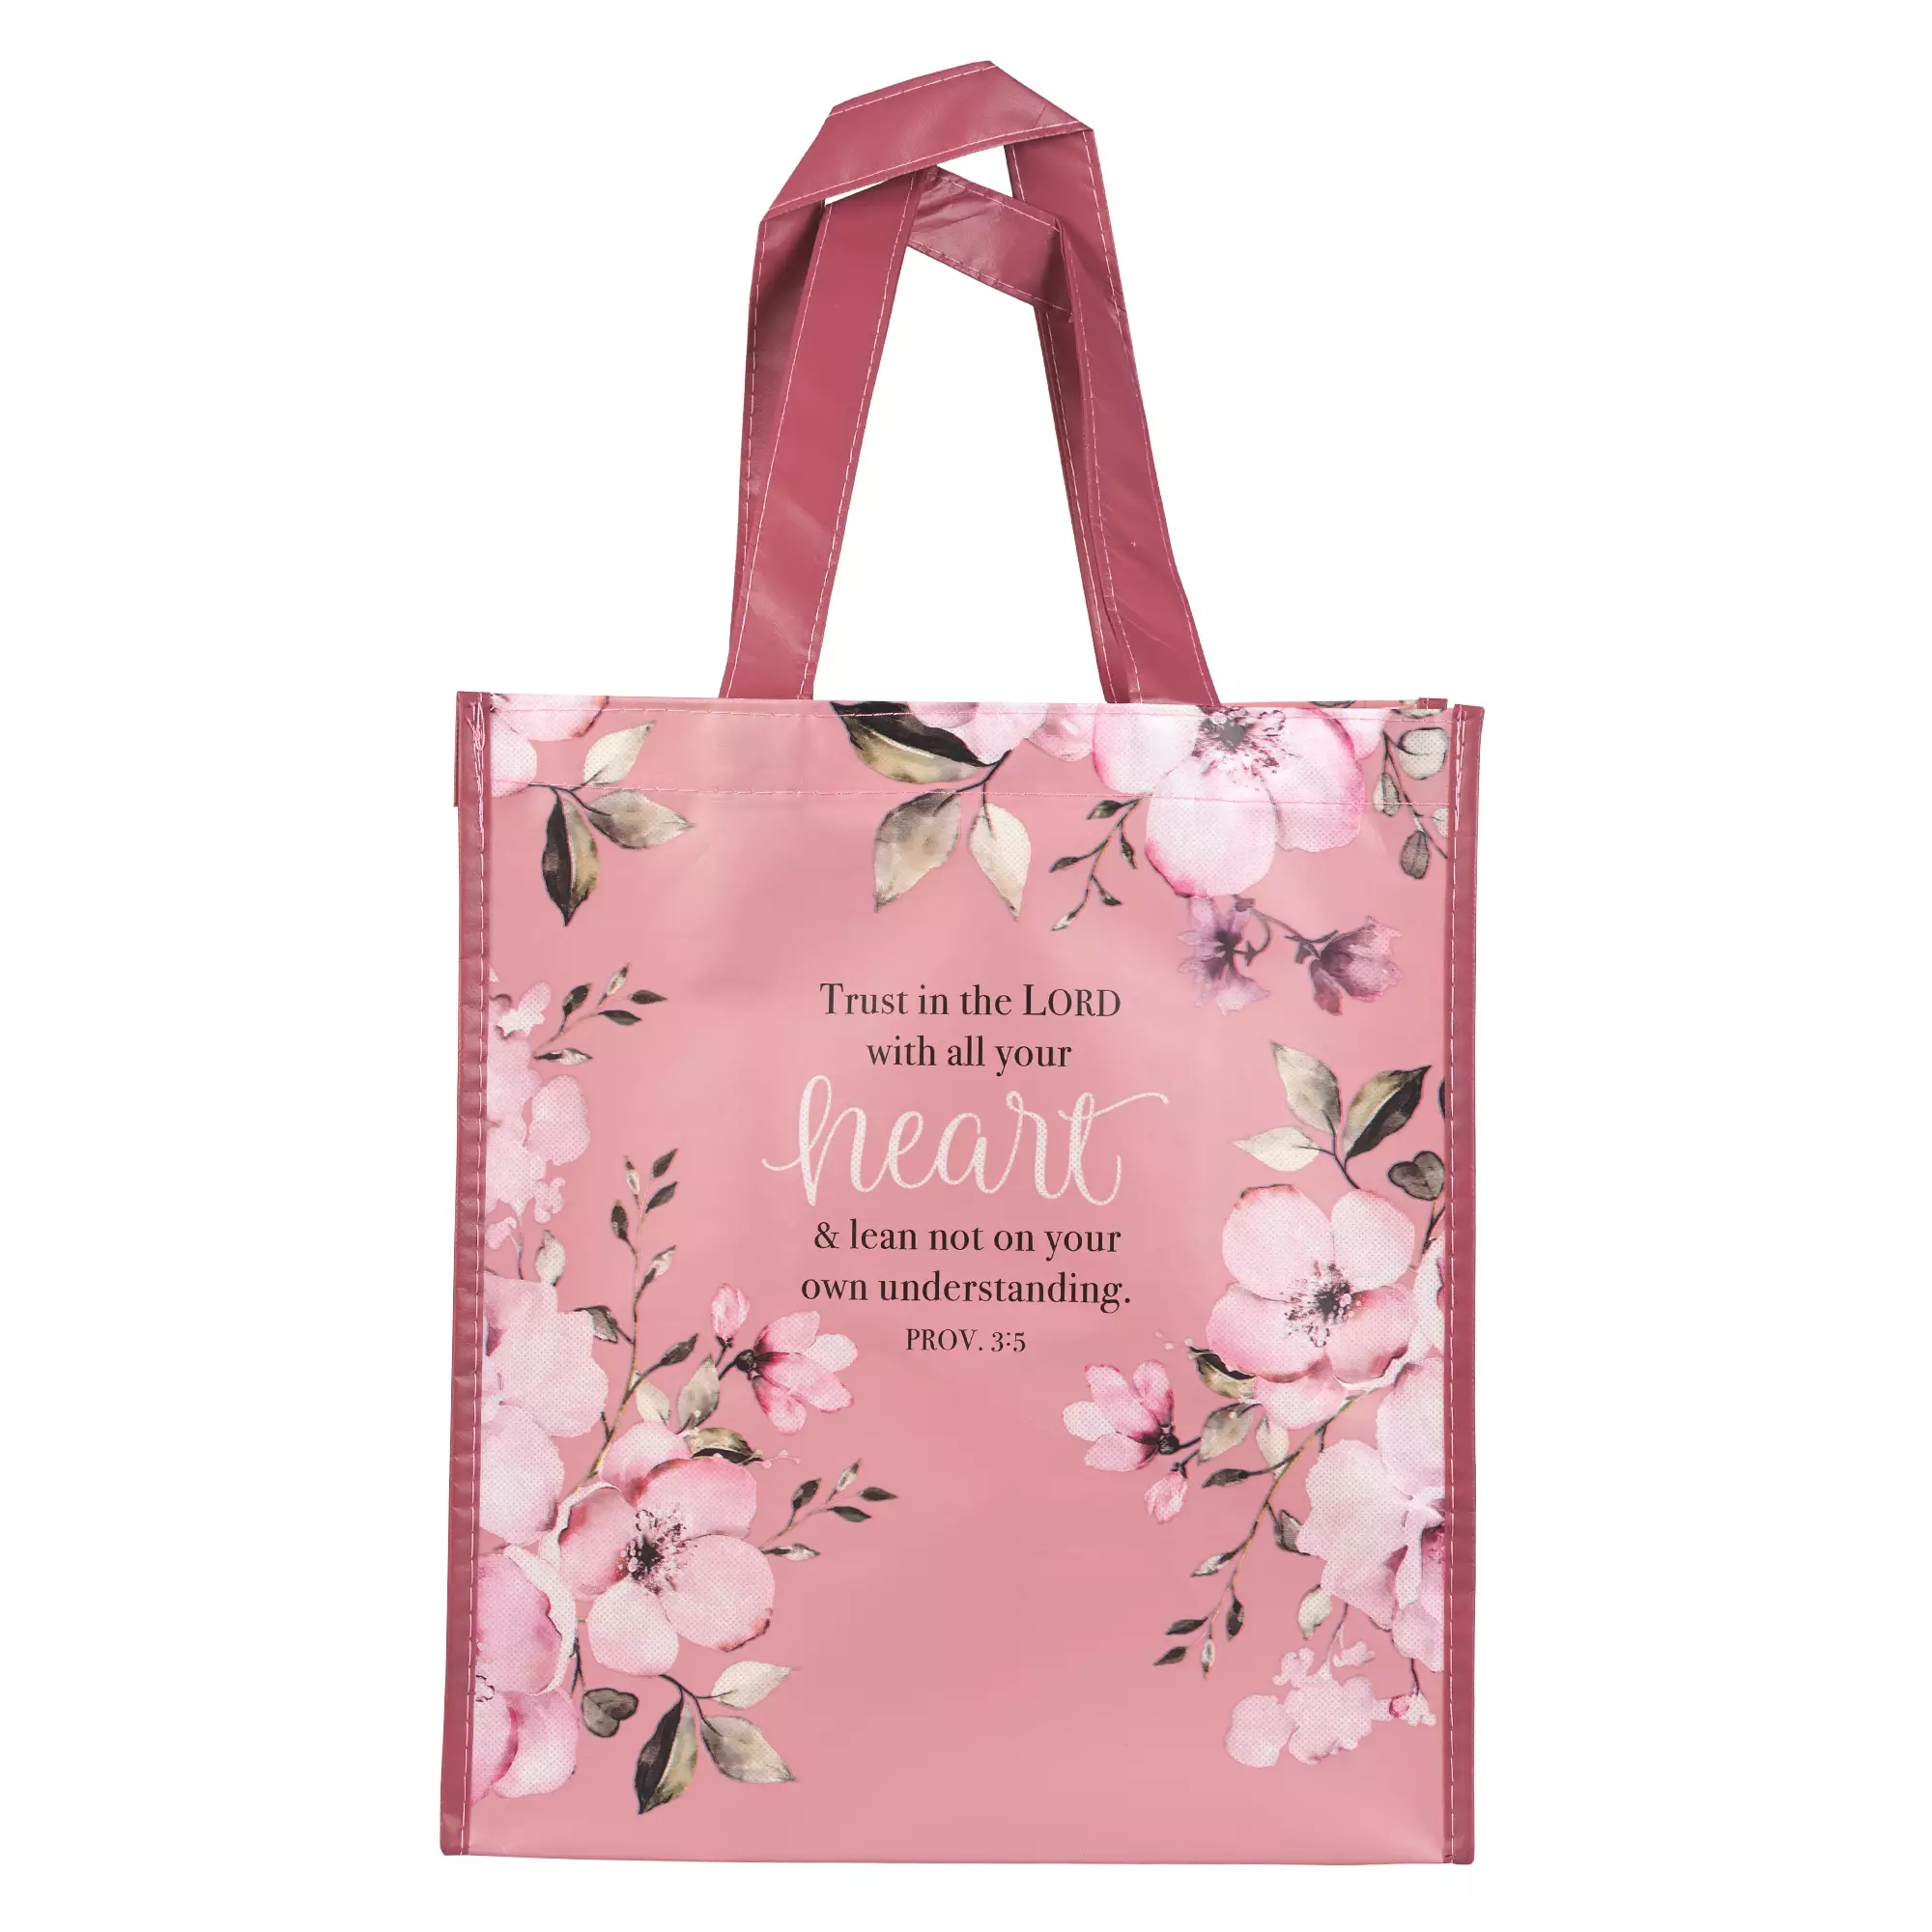 Christian Art Gifts Reusable Shopping Tote Bag: Trust In The Lord Floral Proverbs 3:5 Bible Verse  Inspirational Durable Pink Tote Bag for Groceries, Books, Supplies